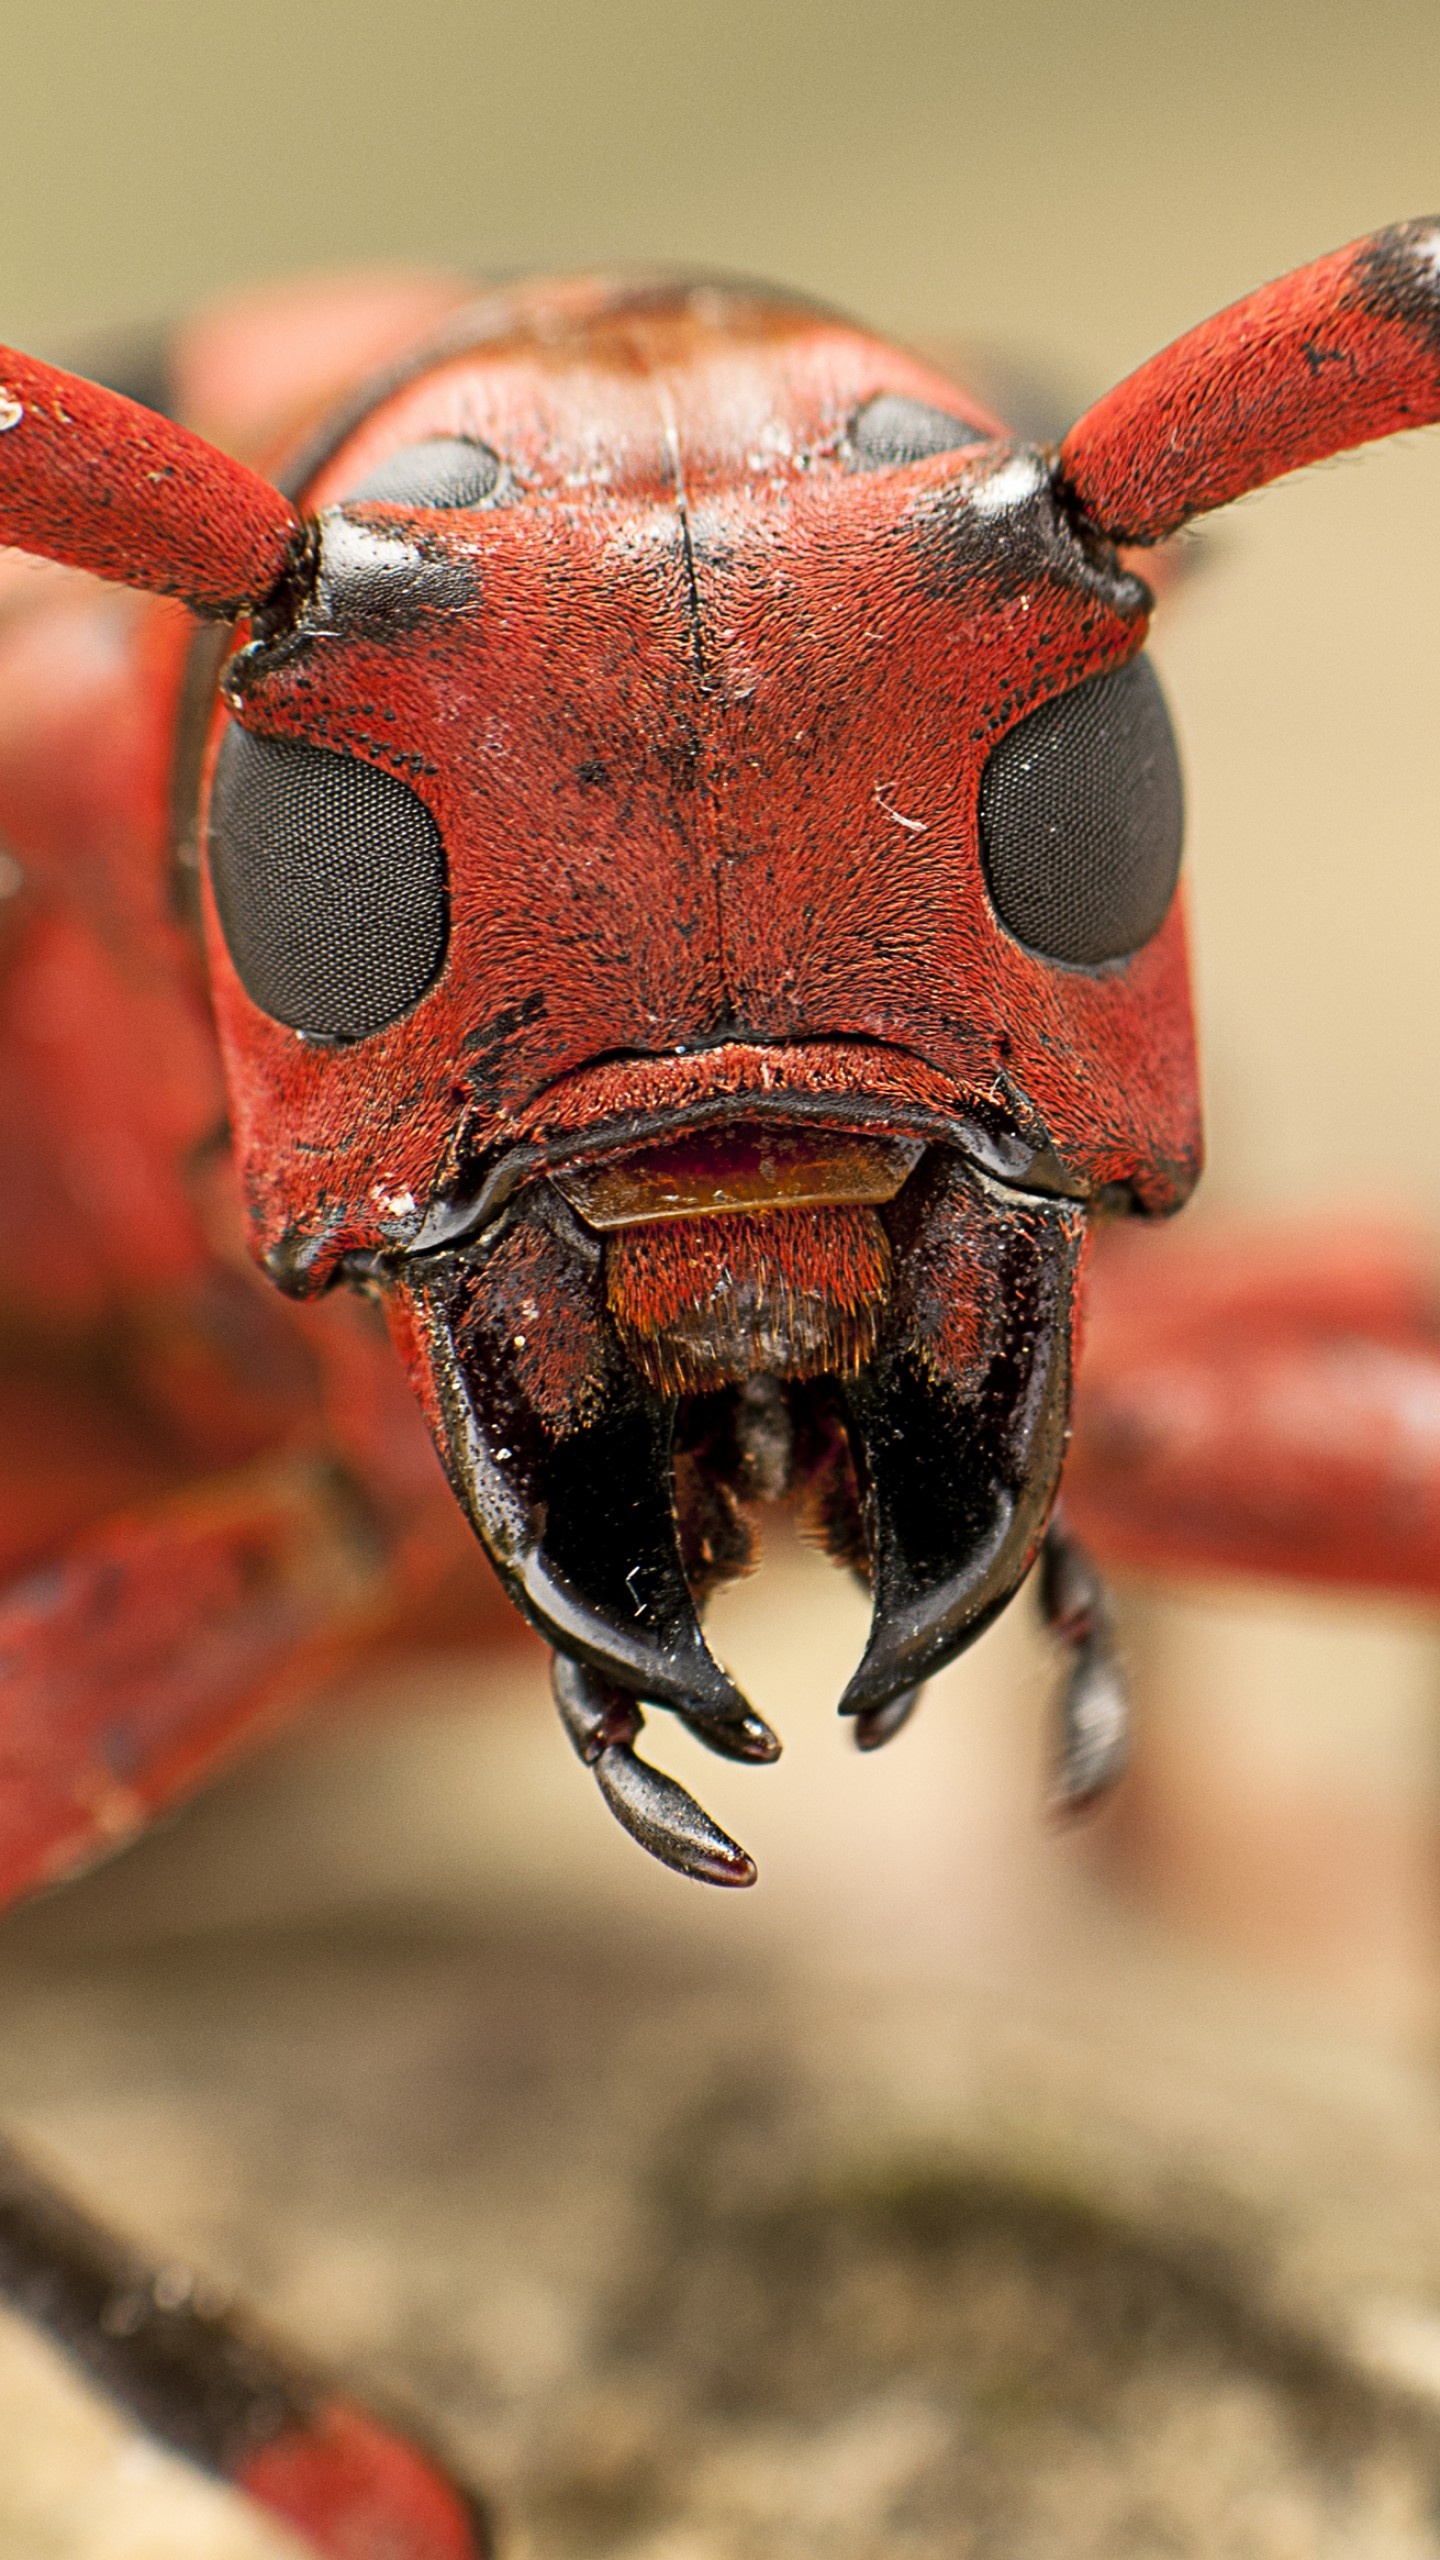 Macro ant wallpaper, Intricate details, Close-up beauty, Awesome animal photography, 1440x2560 HD Handy